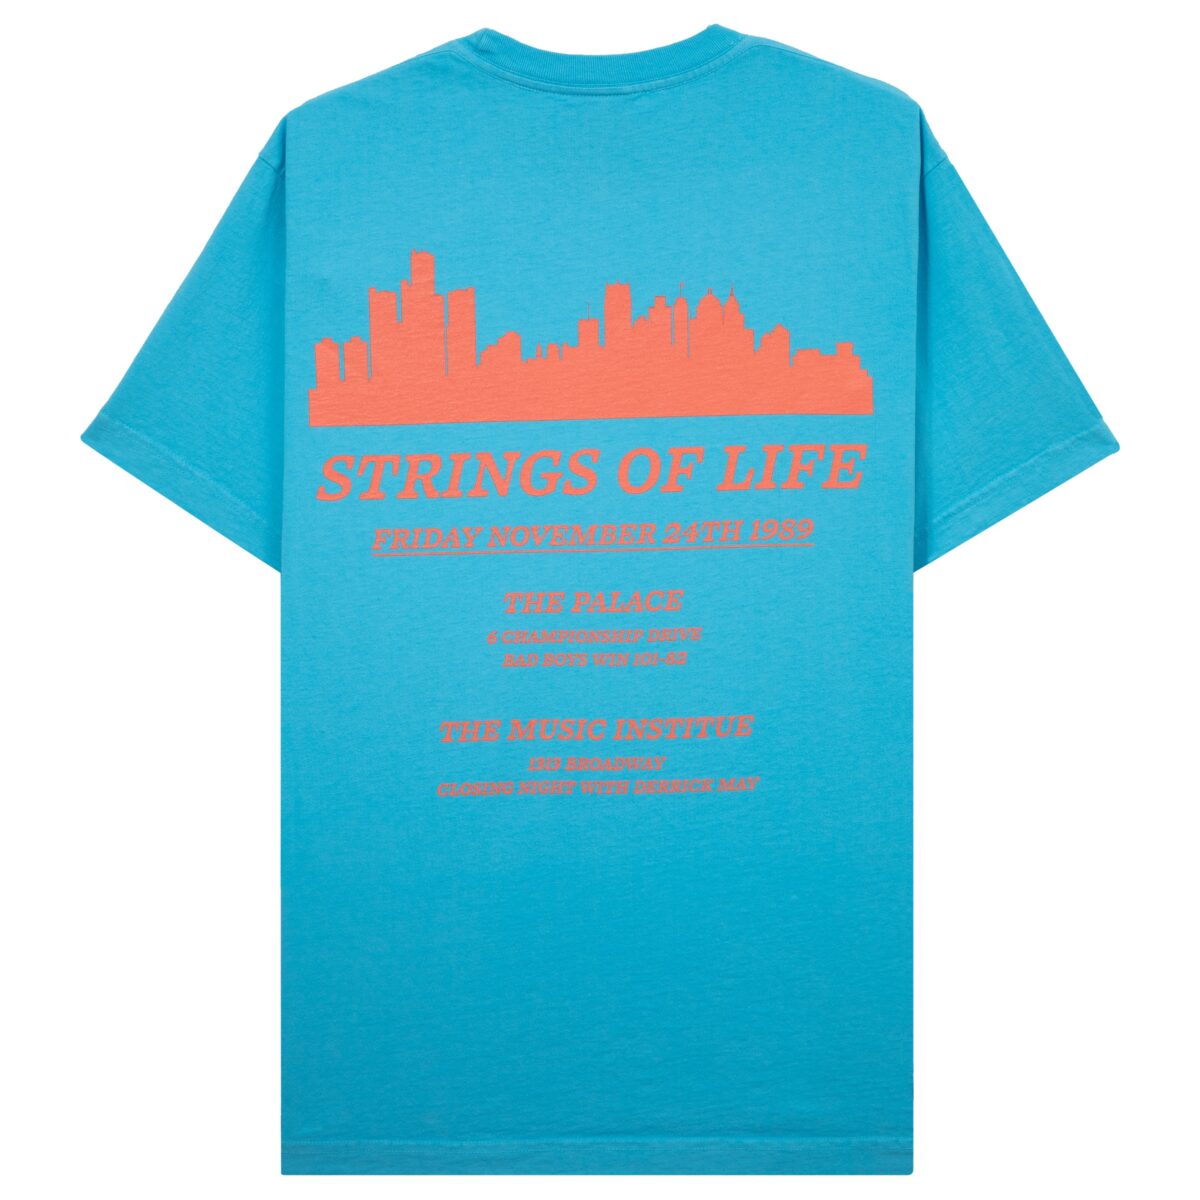 FRANCHISE_STRINGS OF LIFE TEE_BLUE_02